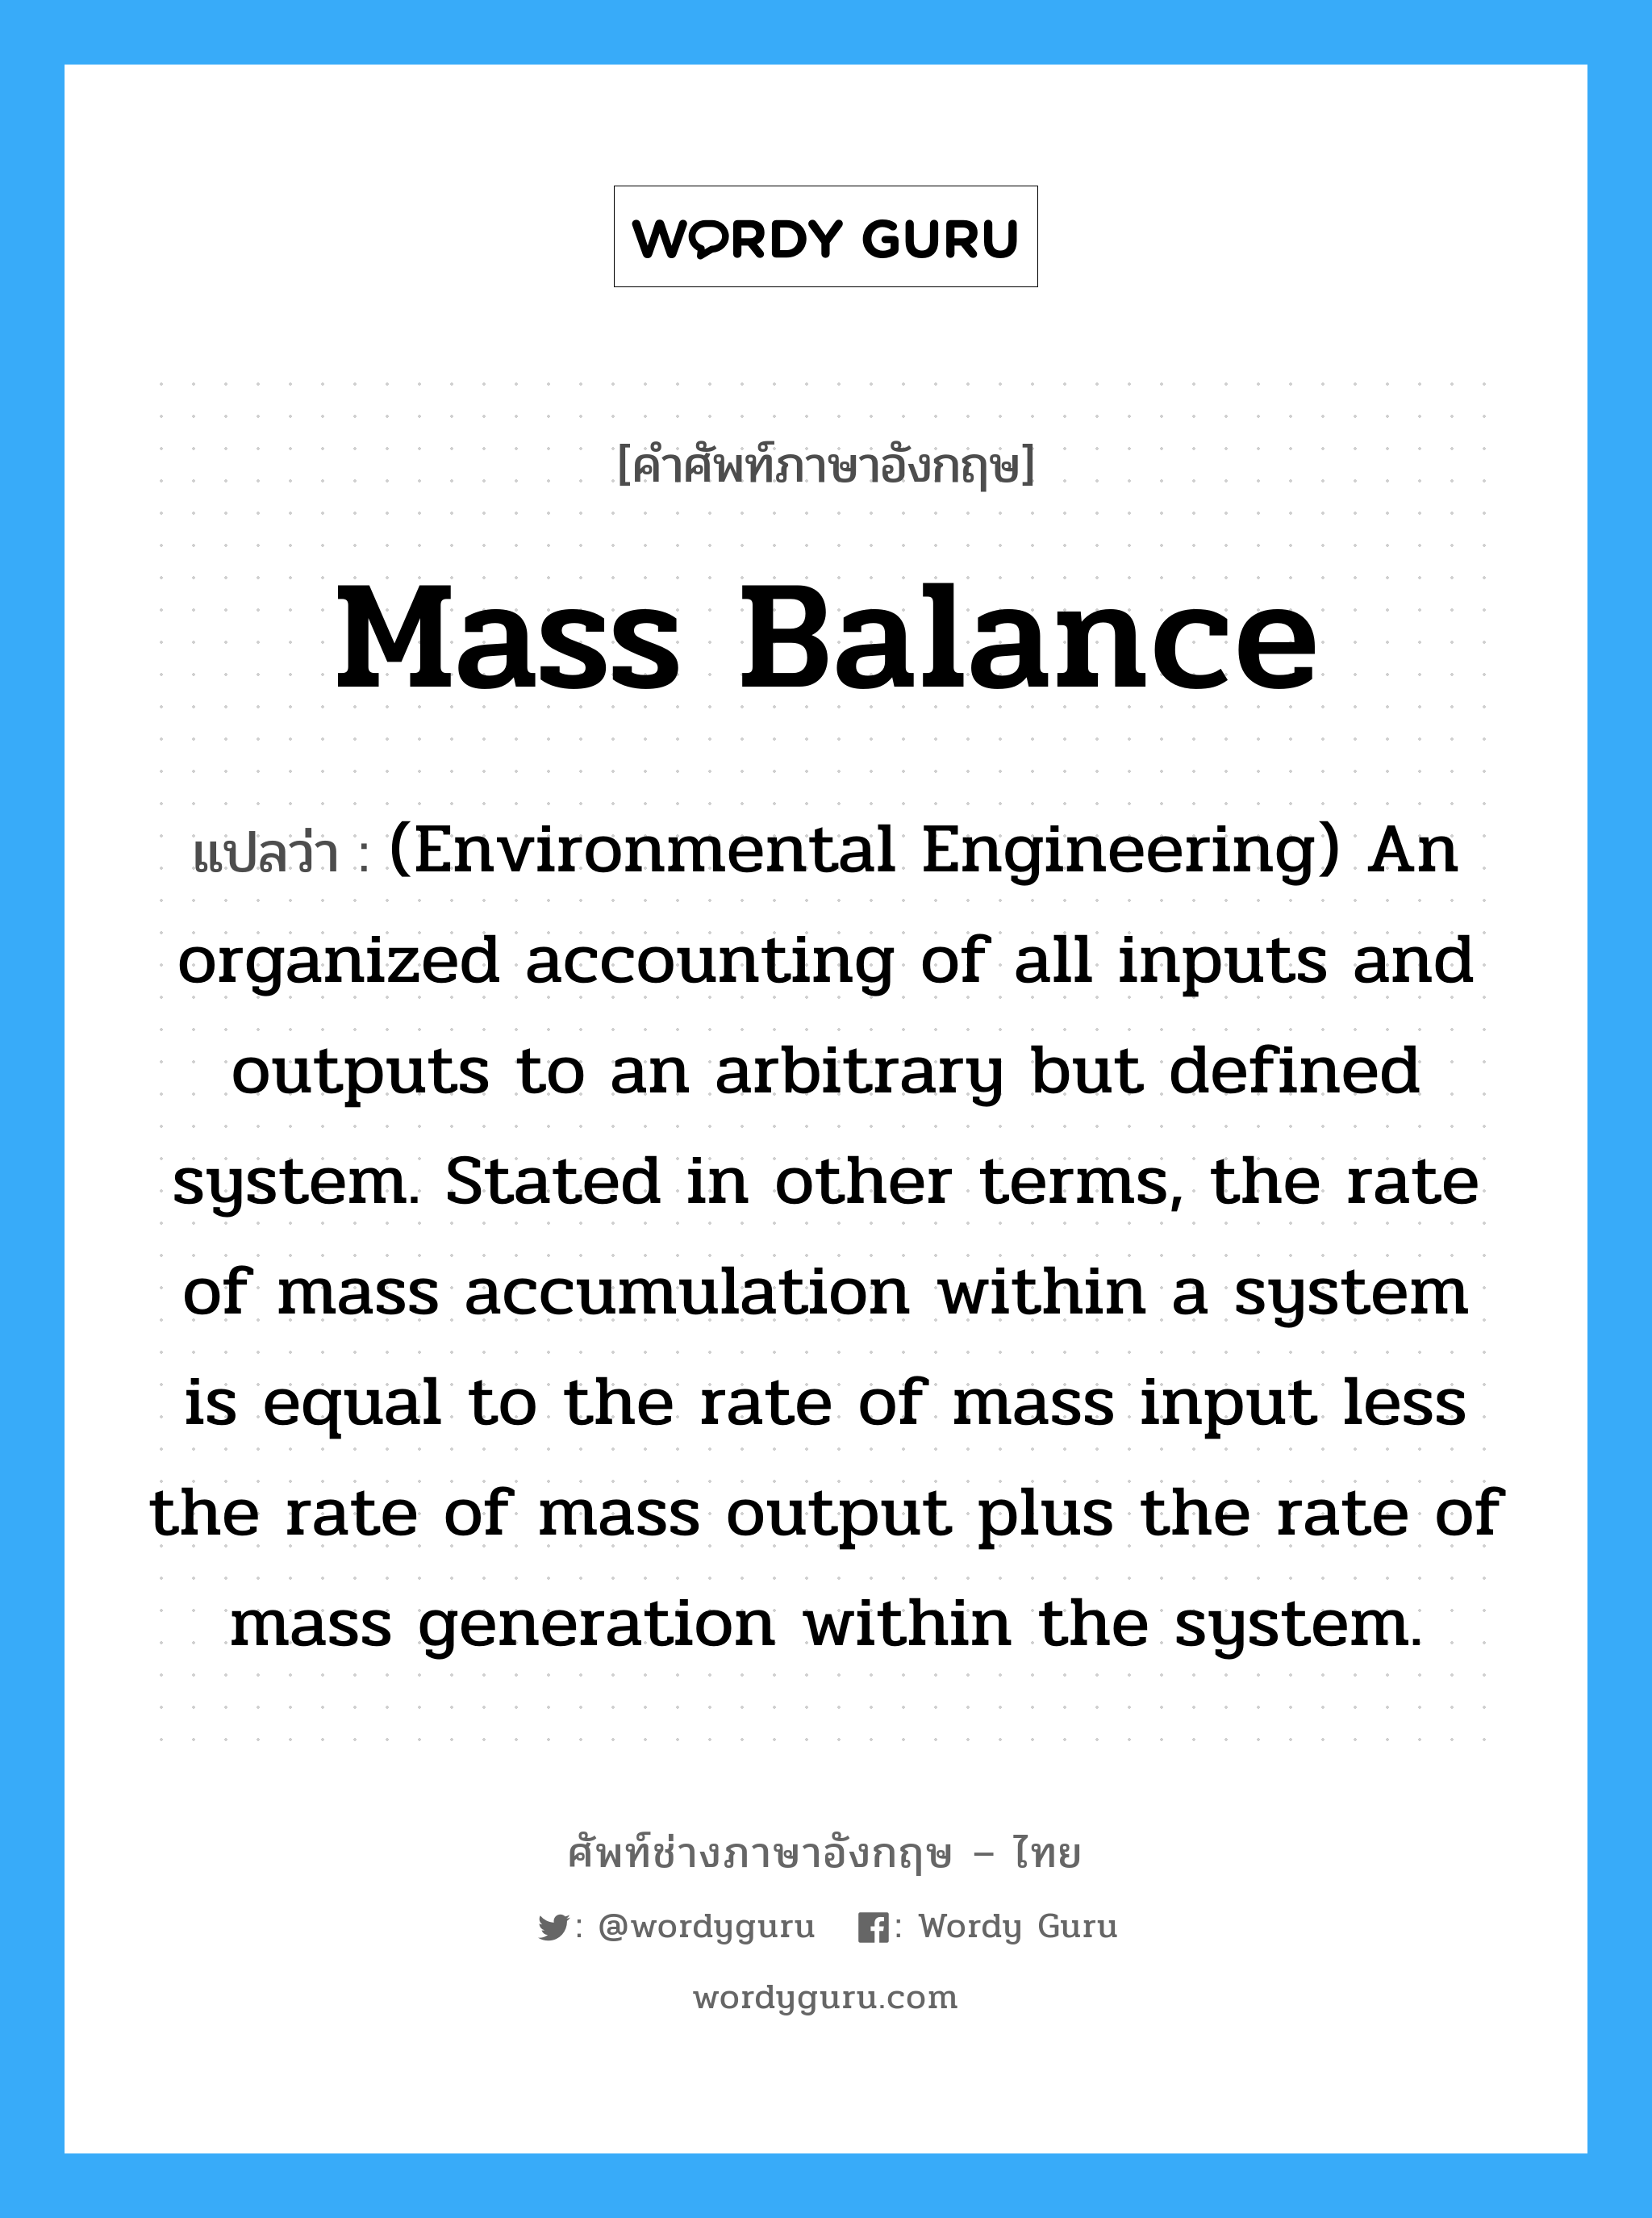 Mass balance แปลว่า?, คำศัพท์ช่างภาษาอังกฤษ - ไทย Mass balance คำศัพท์ภาษาอังกฤษ Mass balance แปลว่า (Environmental Engineering) An organized accounting of all inputs and outputs to an arbitrary but defined system. Stated in other terms, the rate of mass accumulation within a system is equal to the rate of mass input less the rate of mass output plus the rate of mass generation within the system.